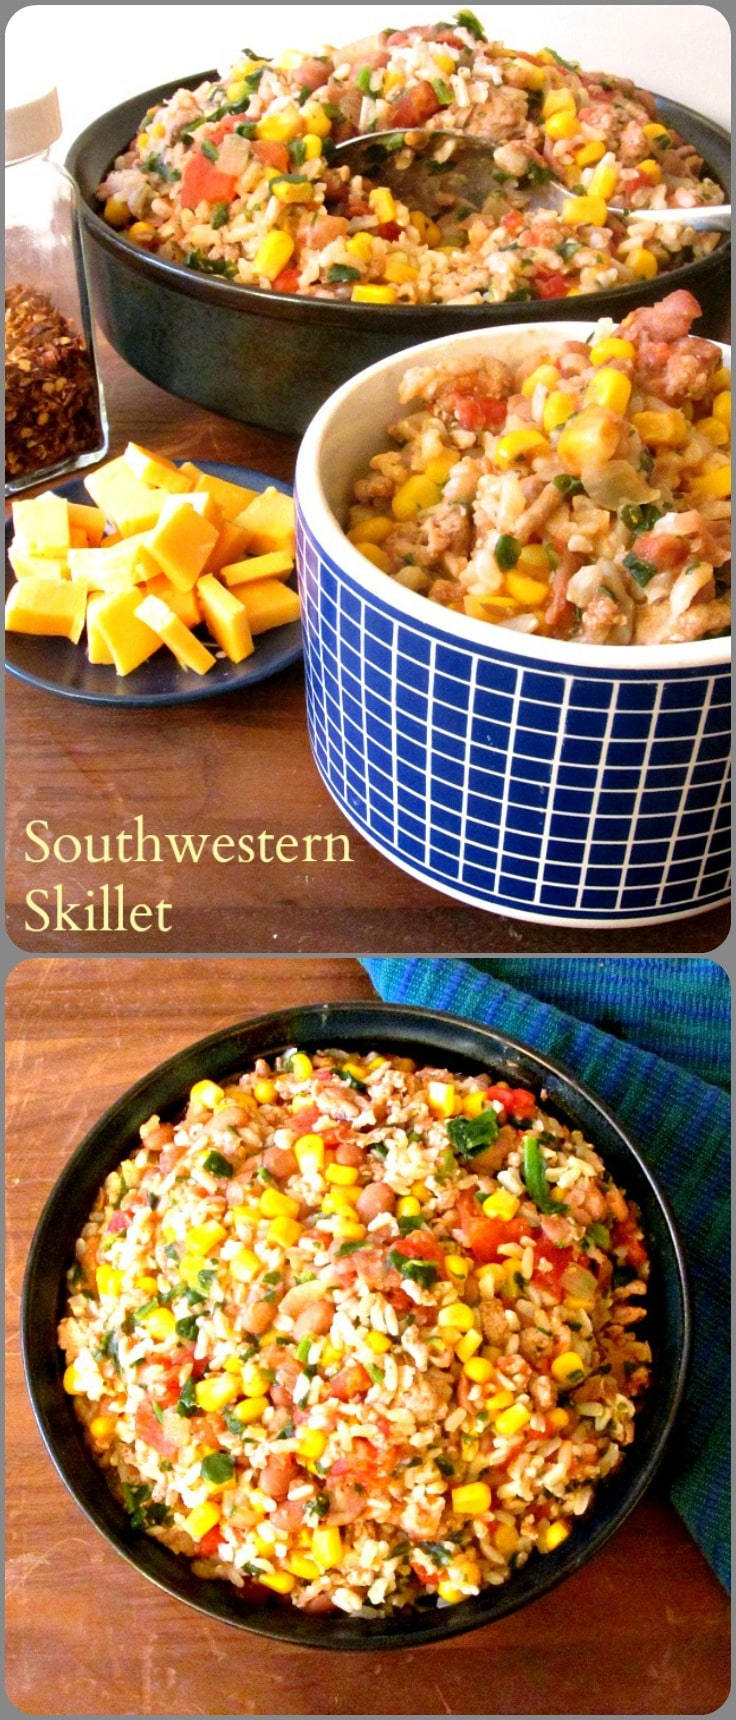 This quick and easy one pot skillet dinner has changed since my mother made something similar, and is now gluten free, but just as easy and tasty! 